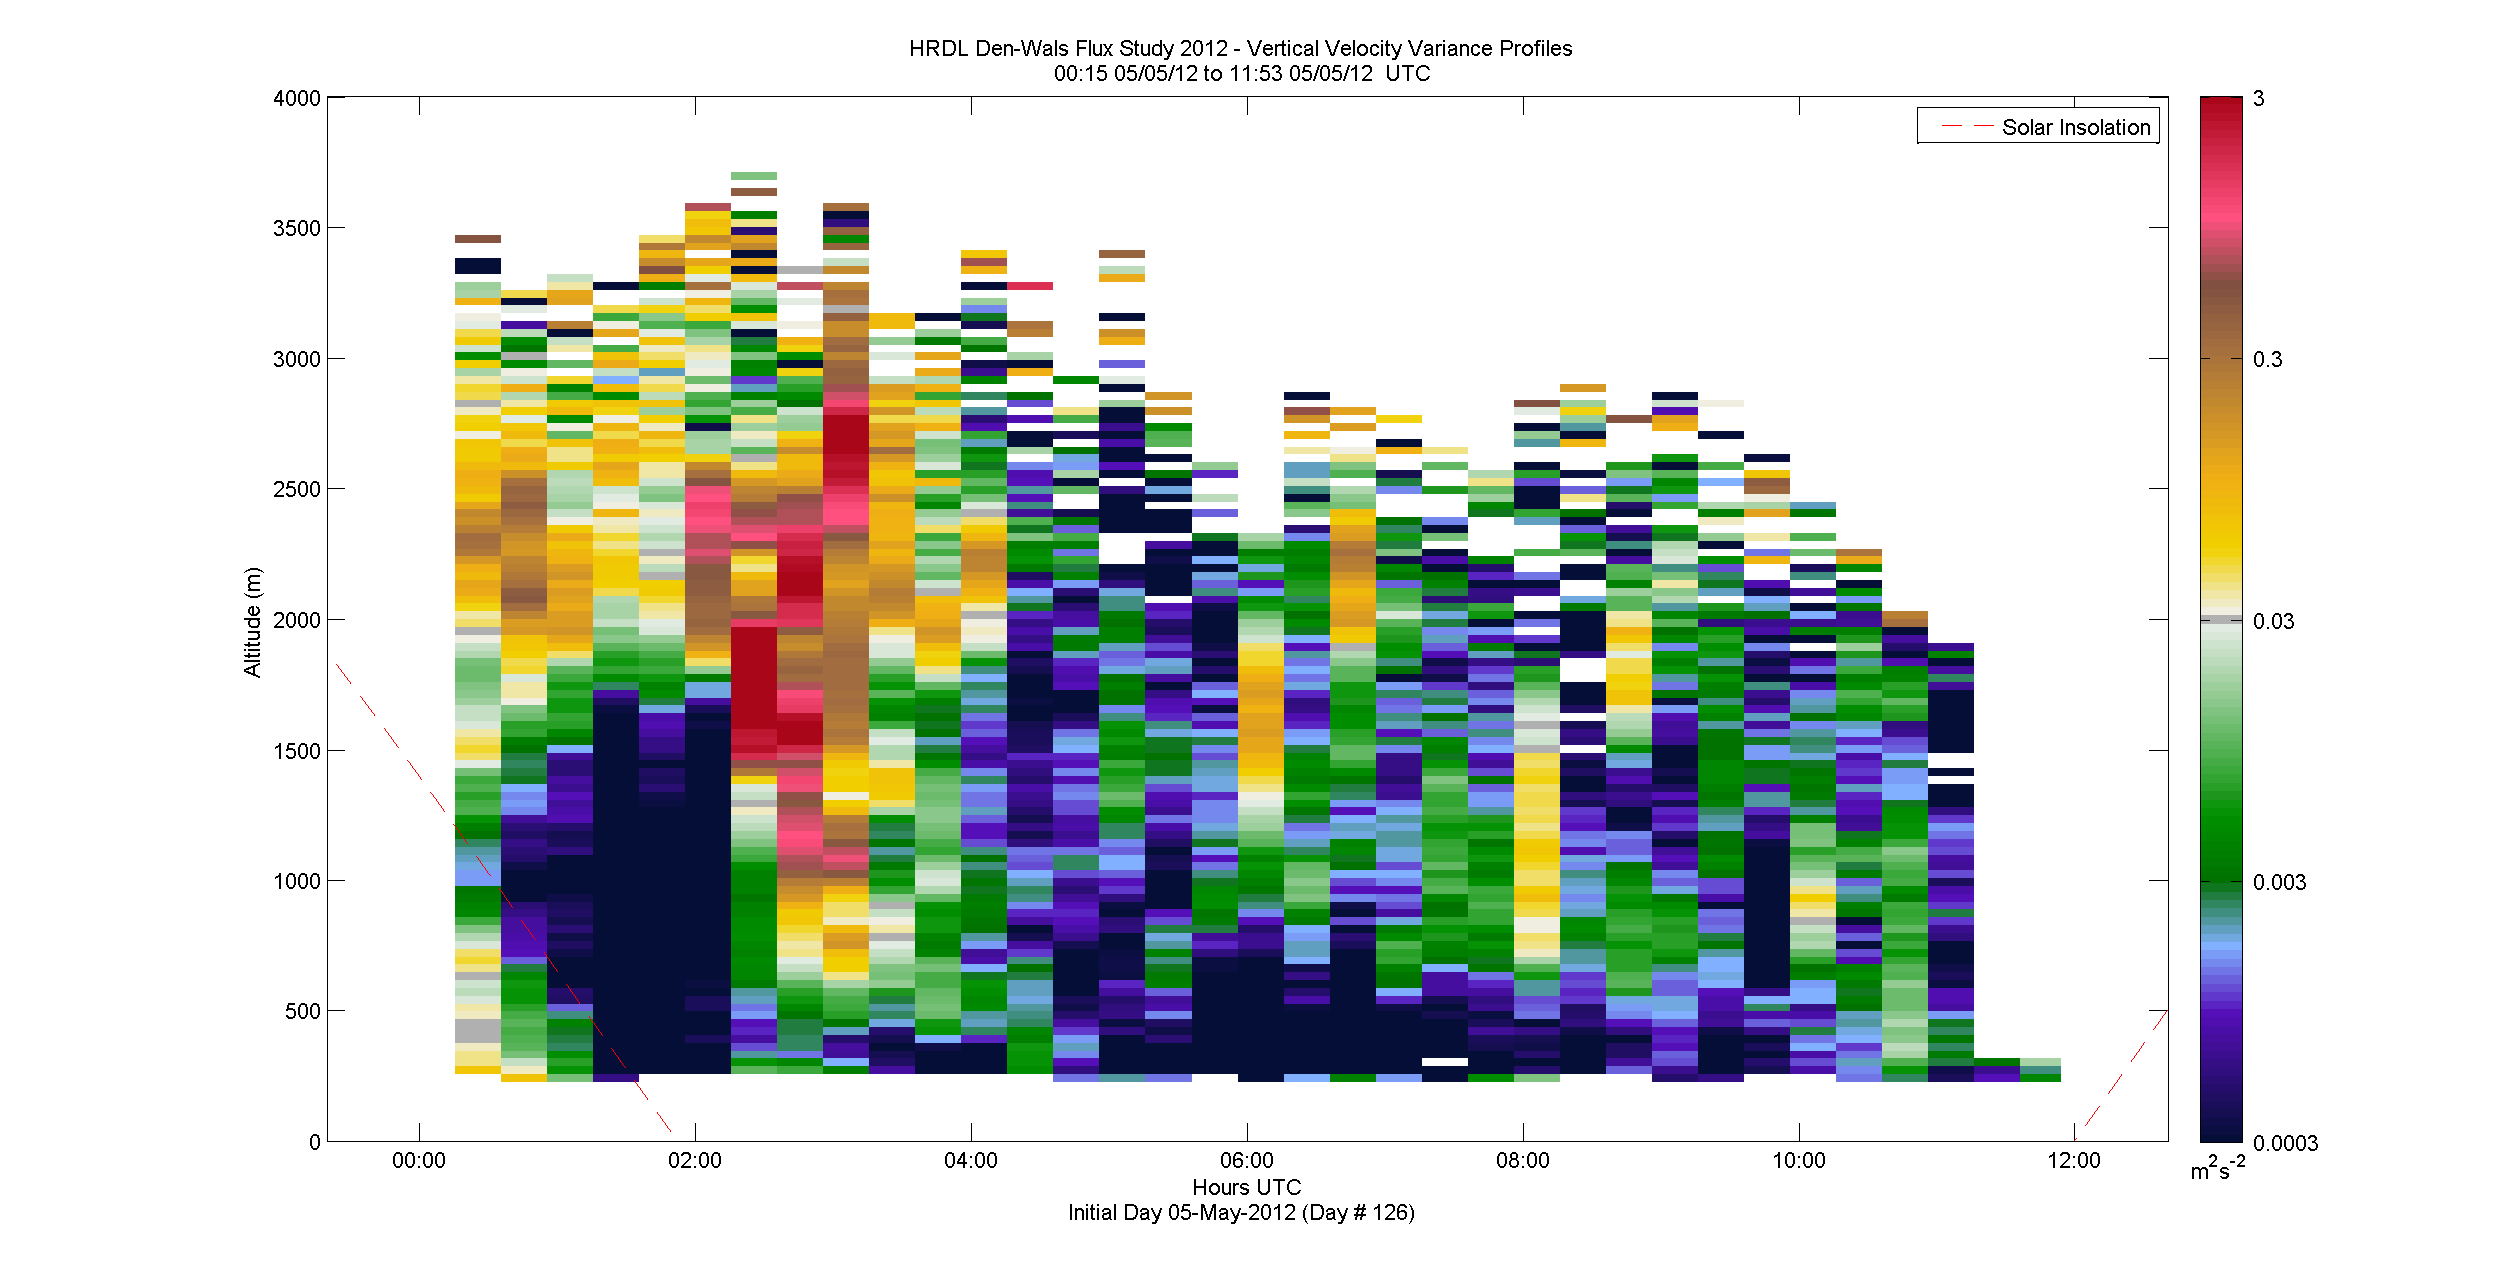 HRDL vertical variance profile - May 5 am